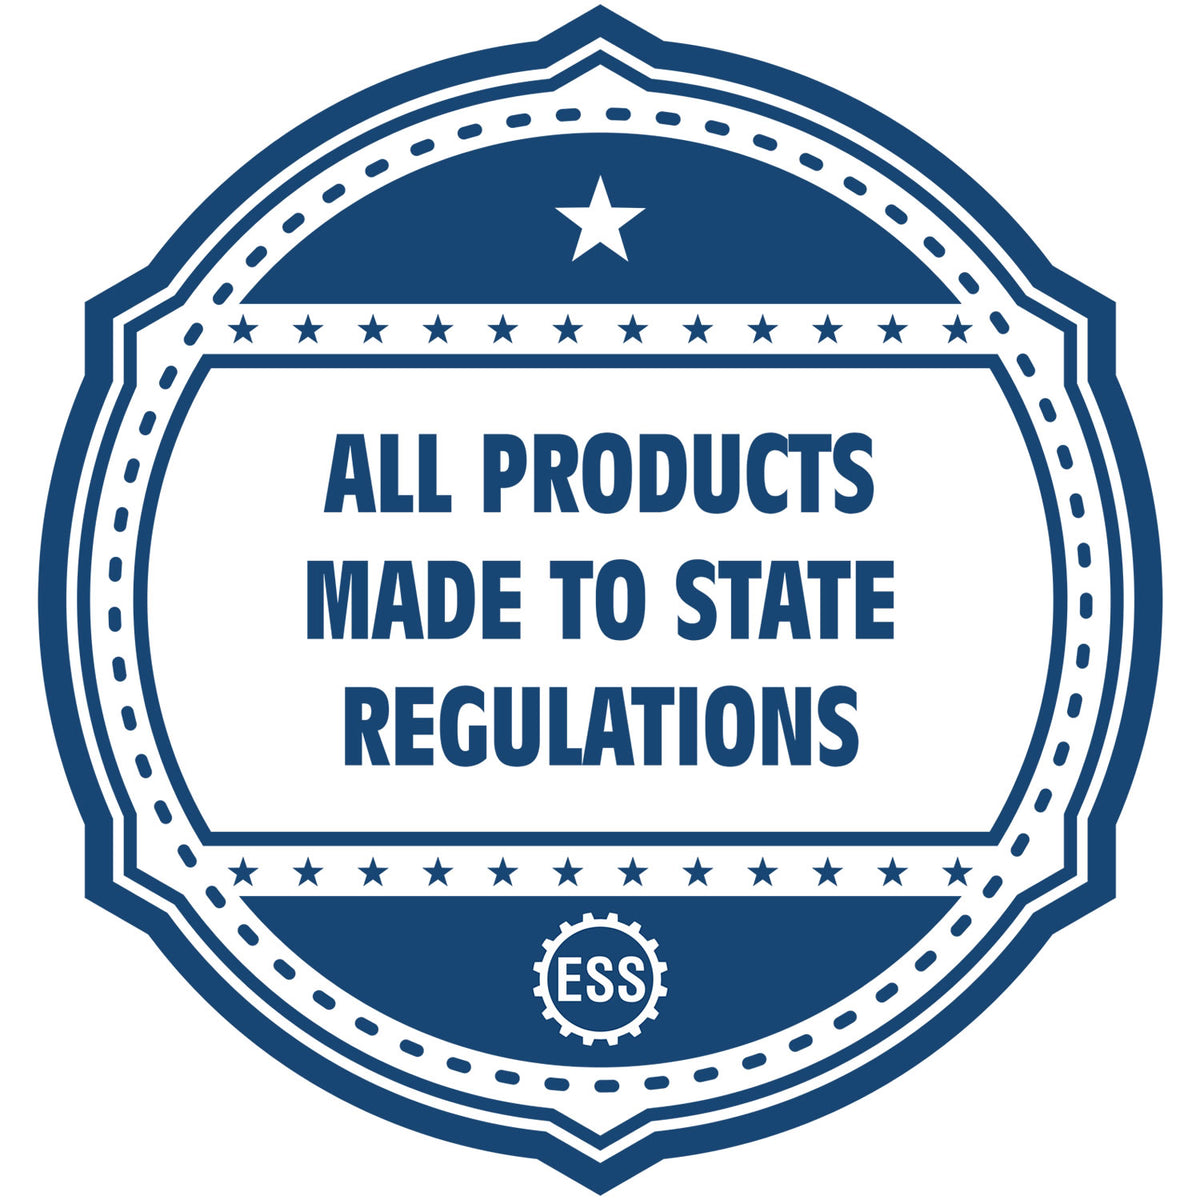 A blue icon or badge for the State of Arkansas Extended Long Reach Geologist Seal showing that this product is made in compliance with state regulations.